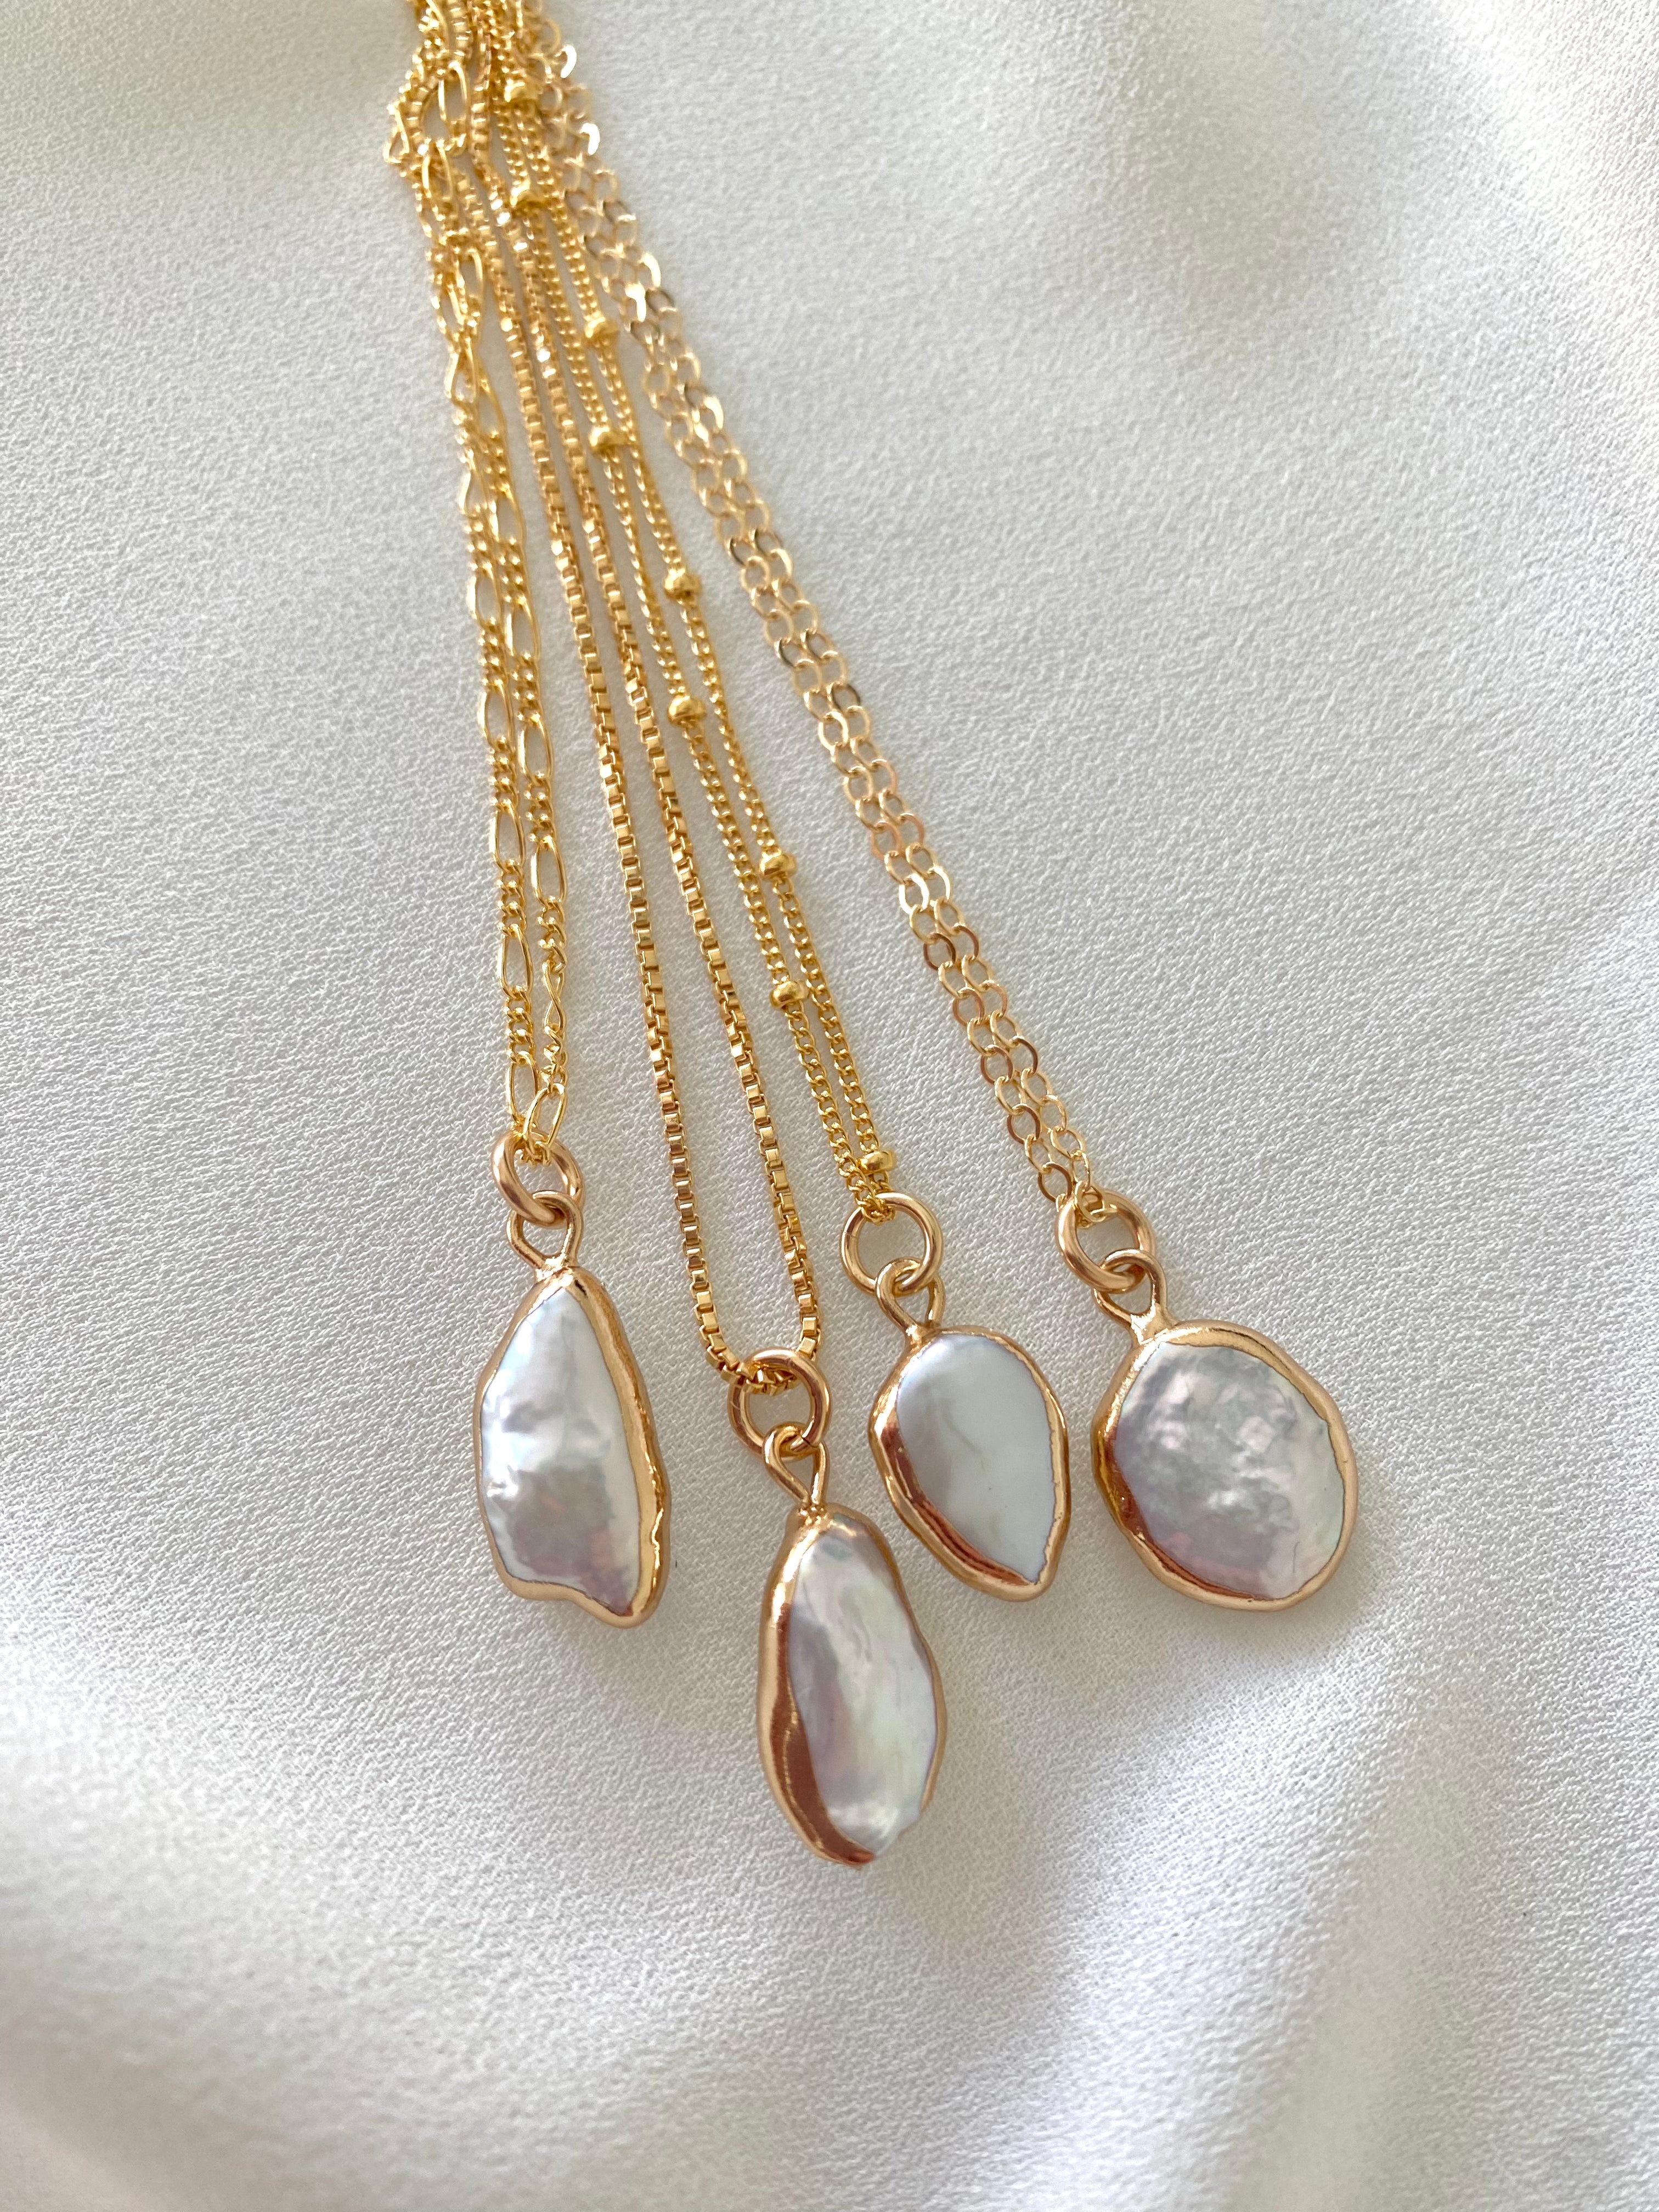 Dainty Keshi Pearl Pendant Necklace - Gold Filled Chain